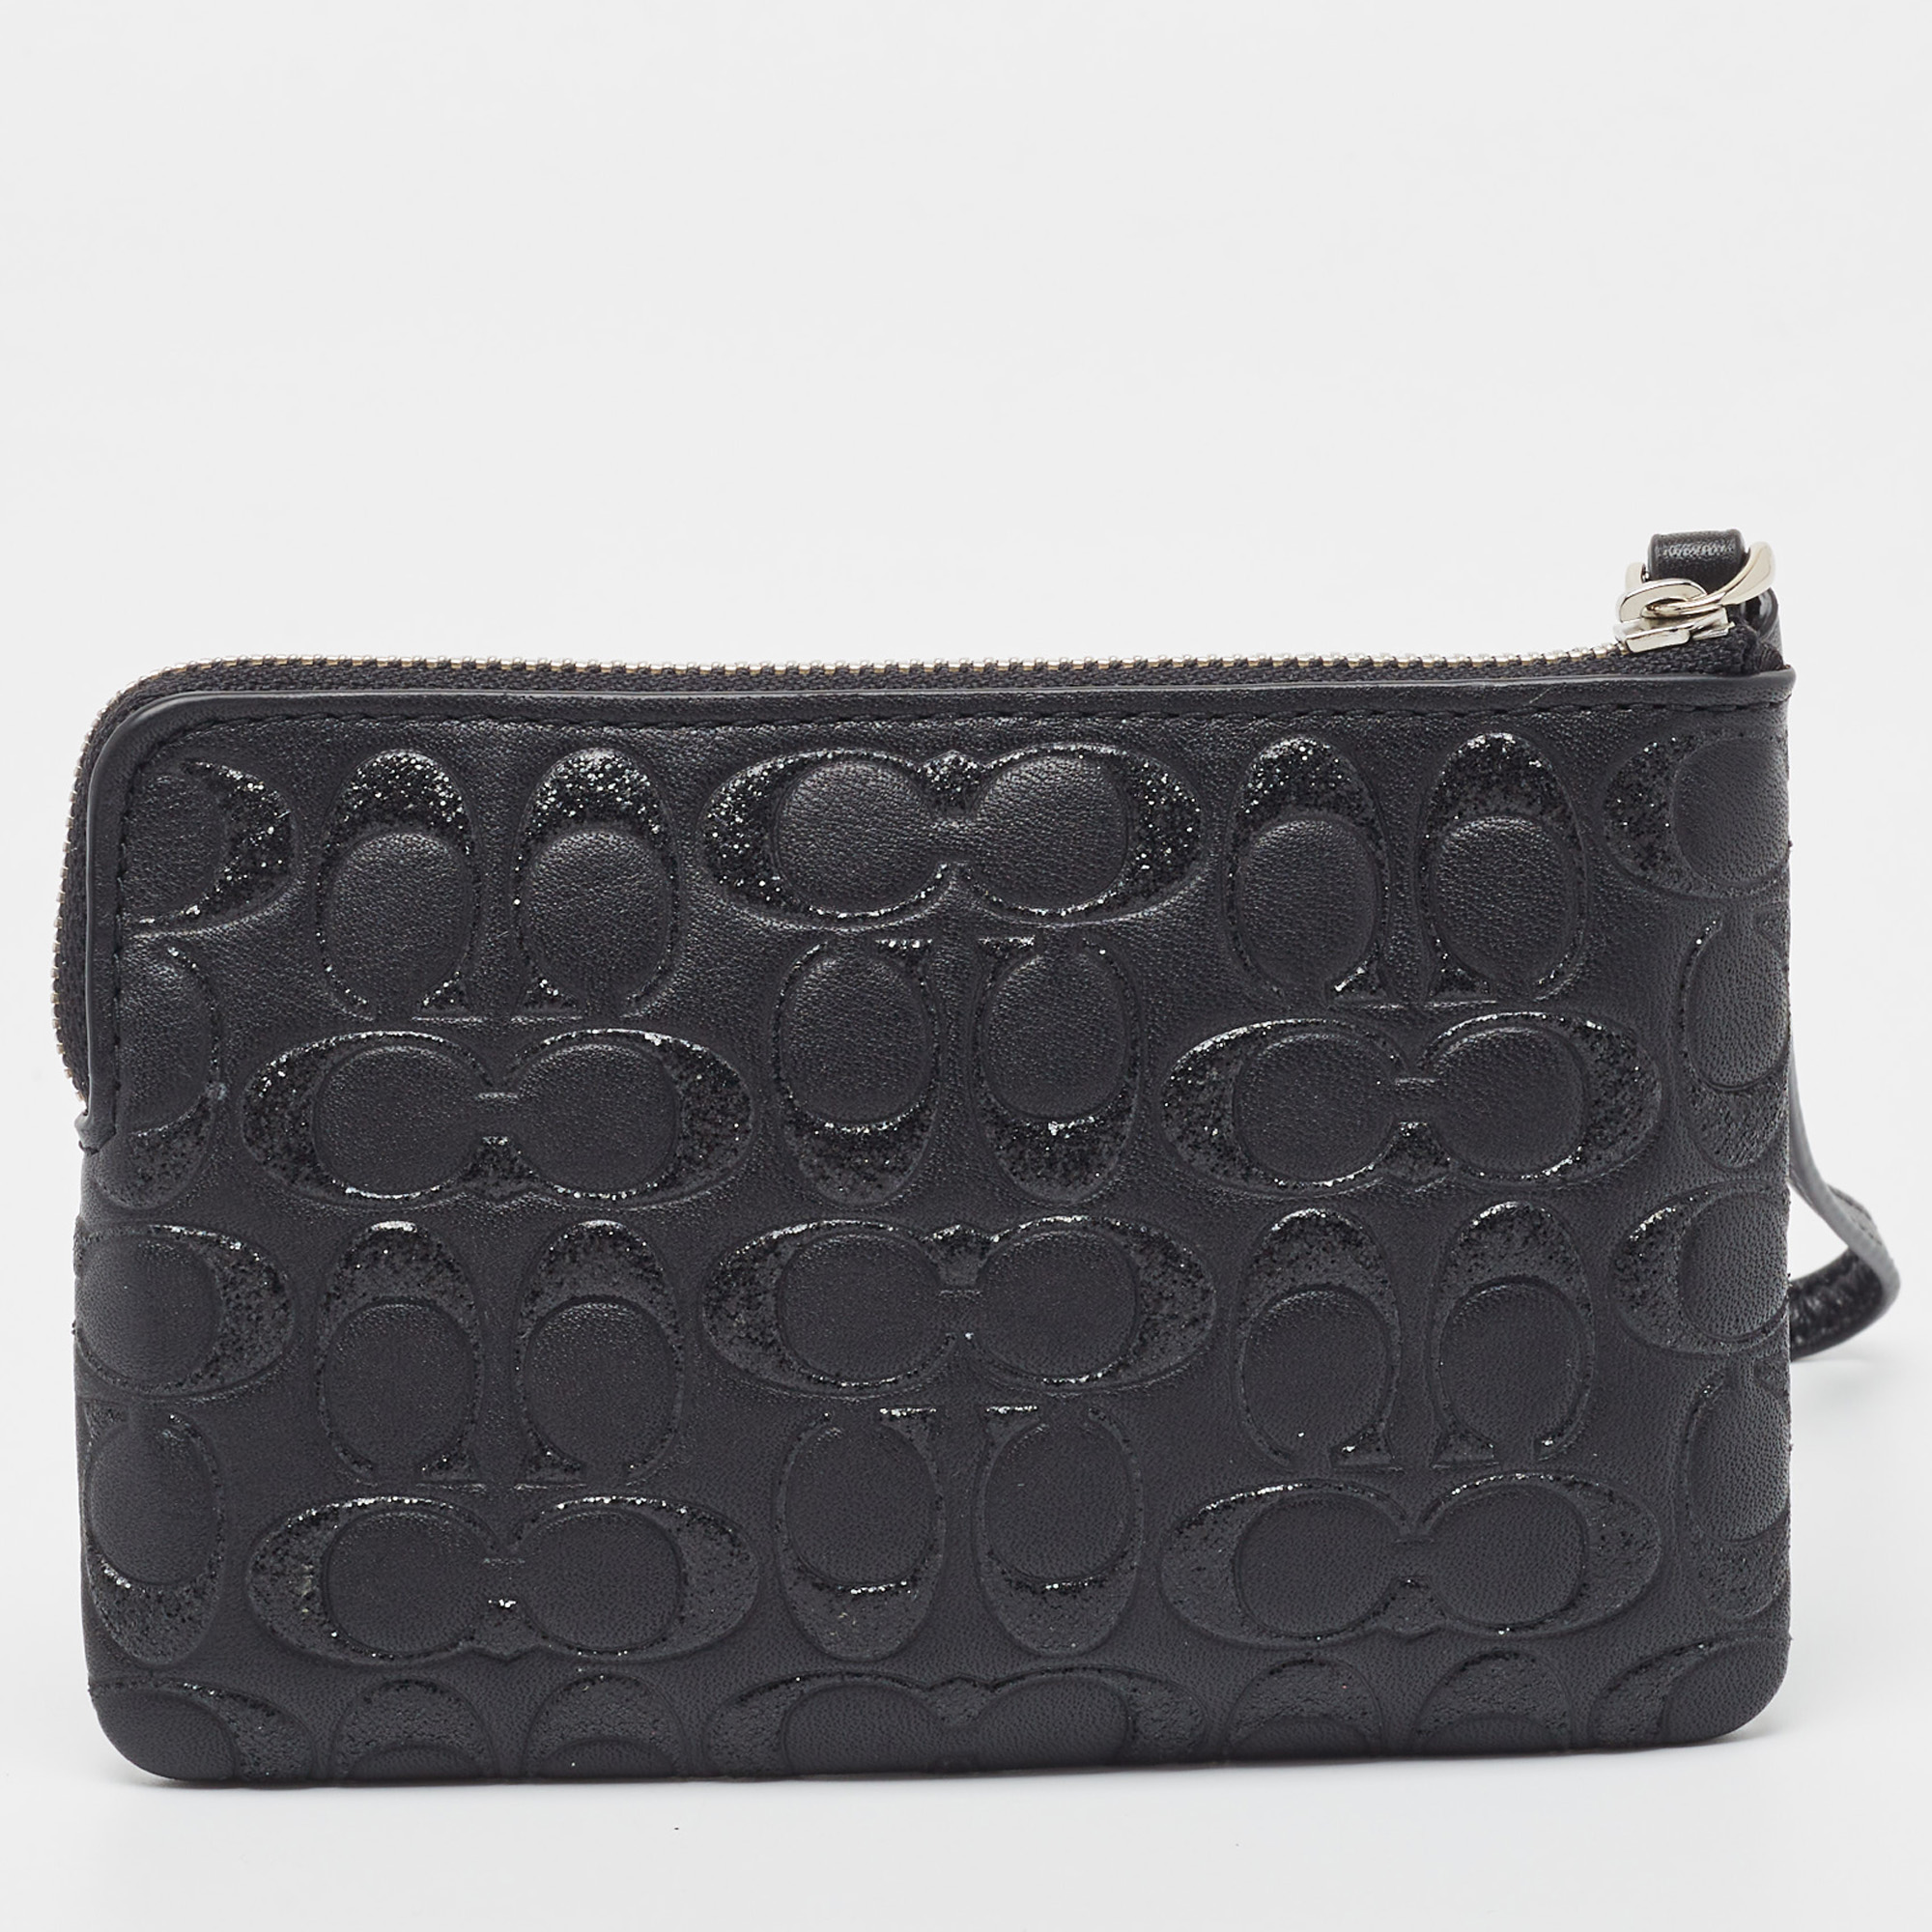 Coach Black Signature Glitter Embossed Leather Boxed Wristlet Clutch